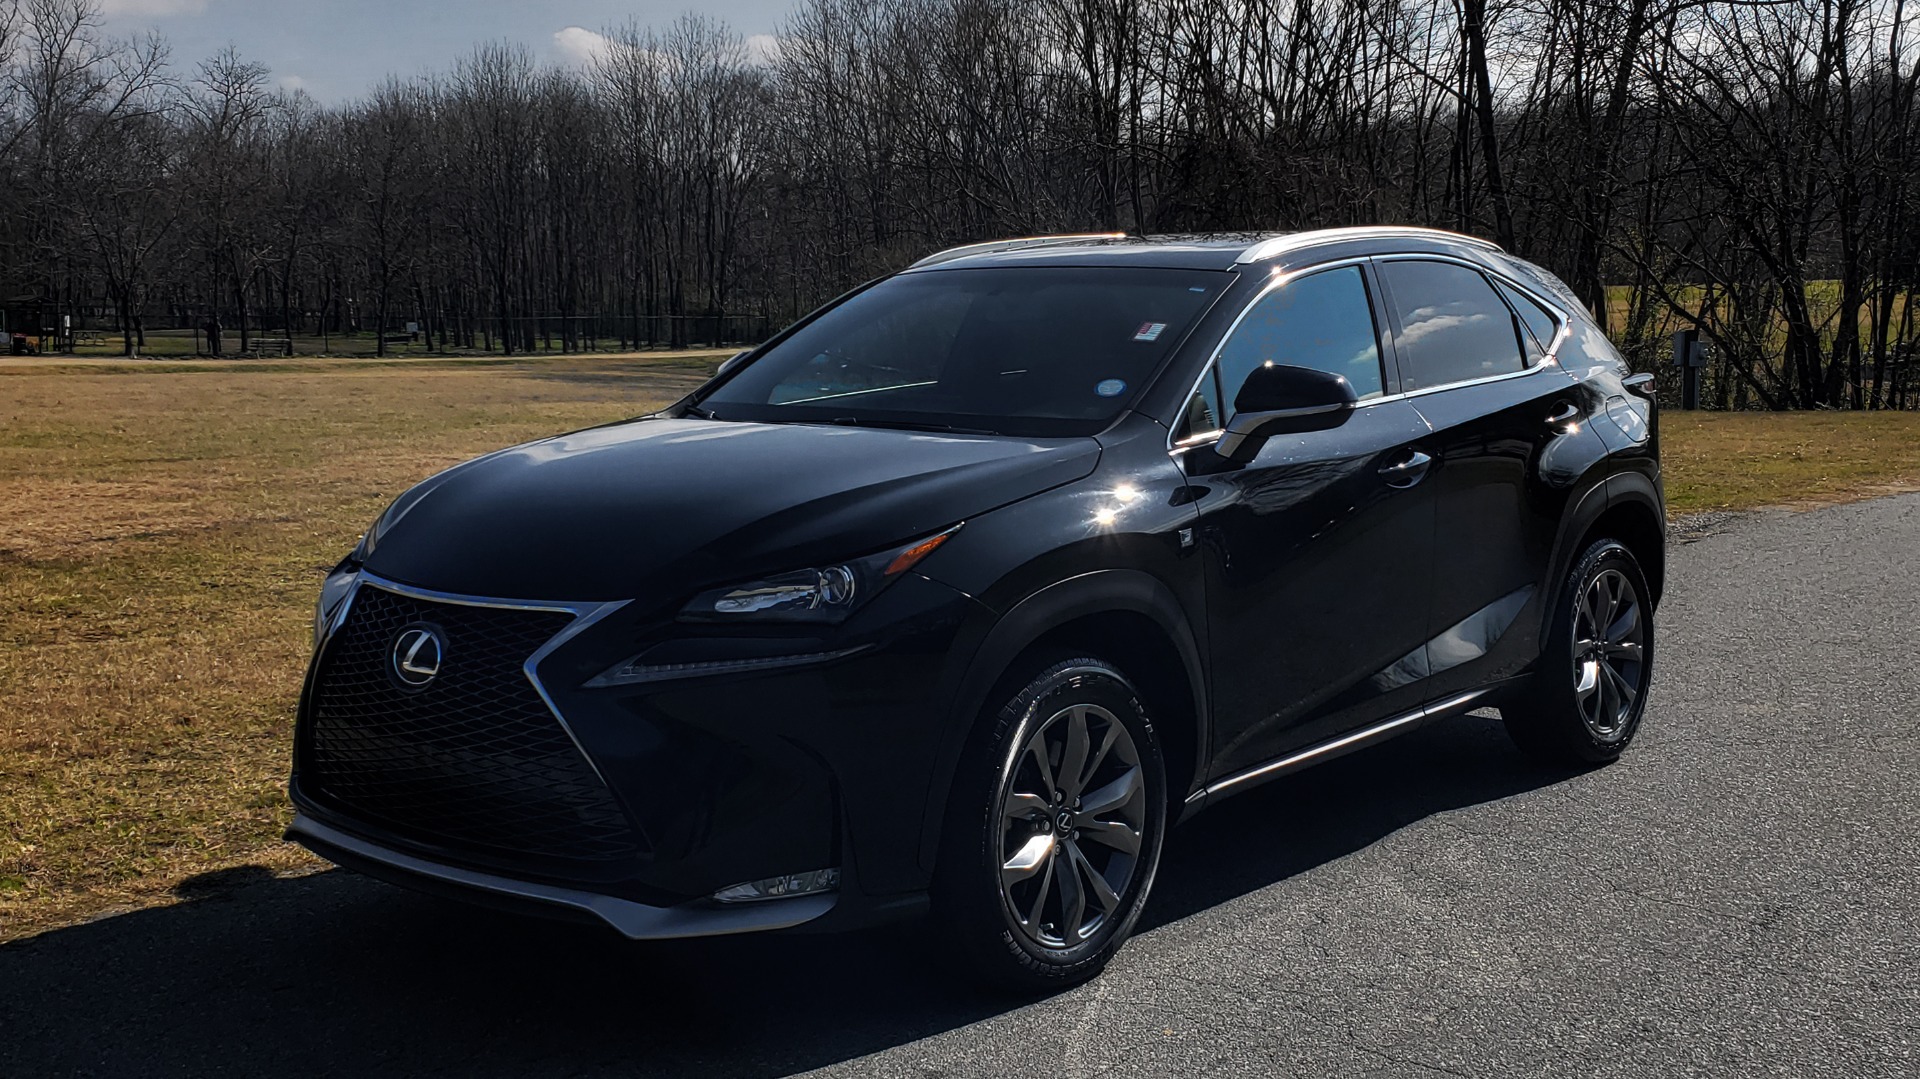 Used 2016 Lexus NX 200t F-SPORT PREMIUM / SUNROOF / BSM / REARVIEW / ELECTROCHROMIC for sale Sold at Formula Imports in Charlotte NC 28227 1